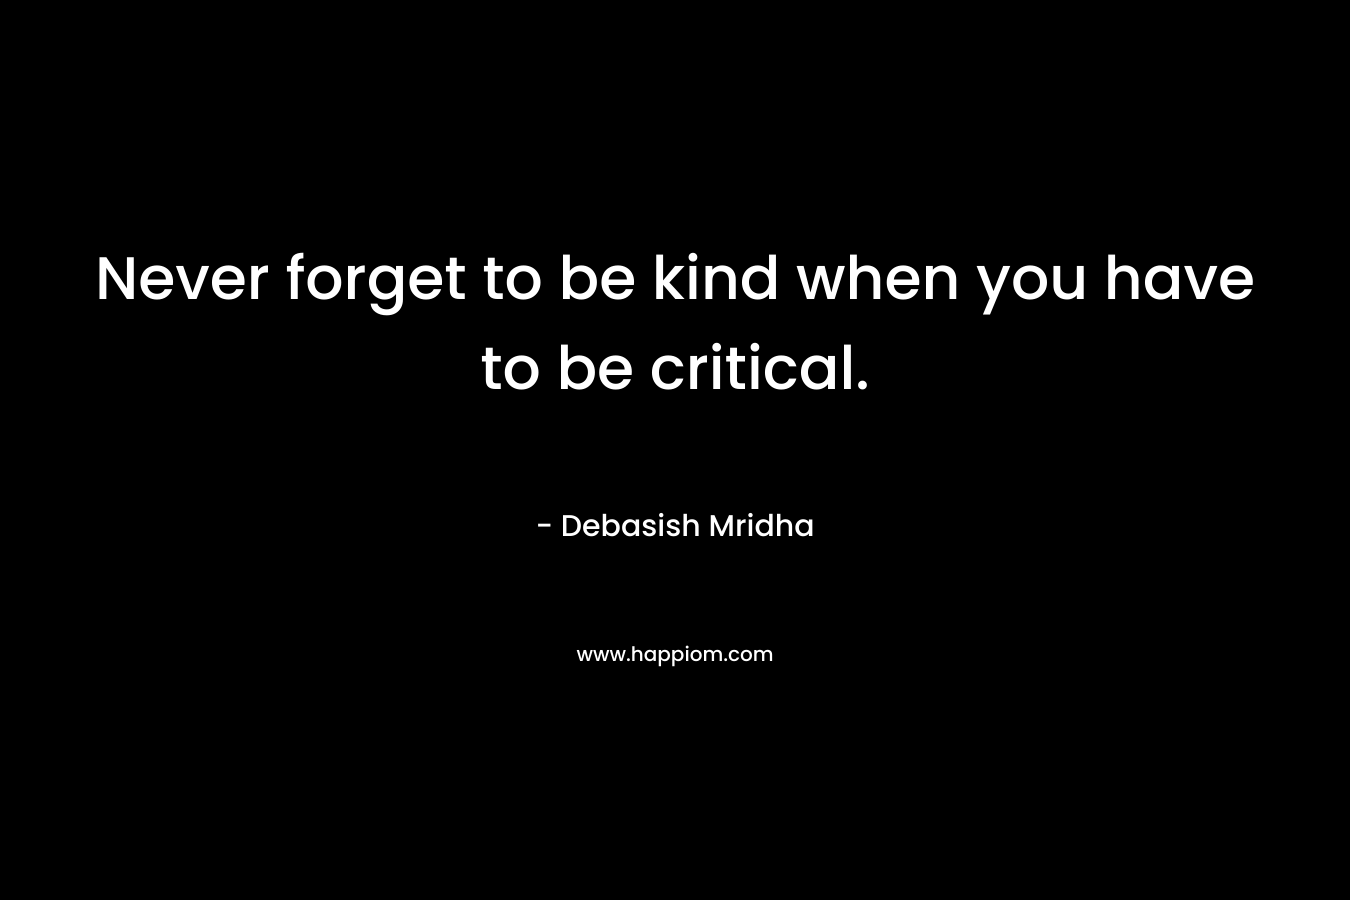 Never forget to be kind when you have to be critical.